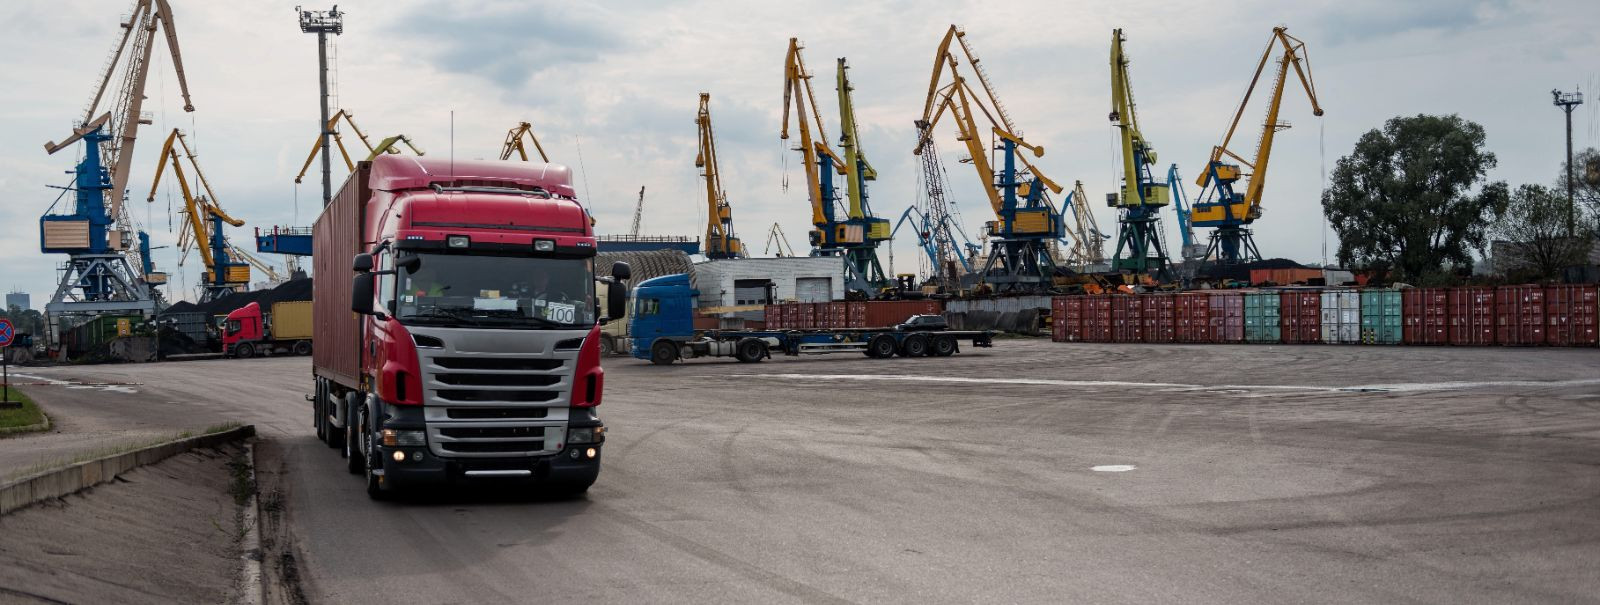 In the fast-paced world of logistics, efficiency and precision are paramount. PLANLOGI OÜ's advanced logistics software is designed to address the complex needs